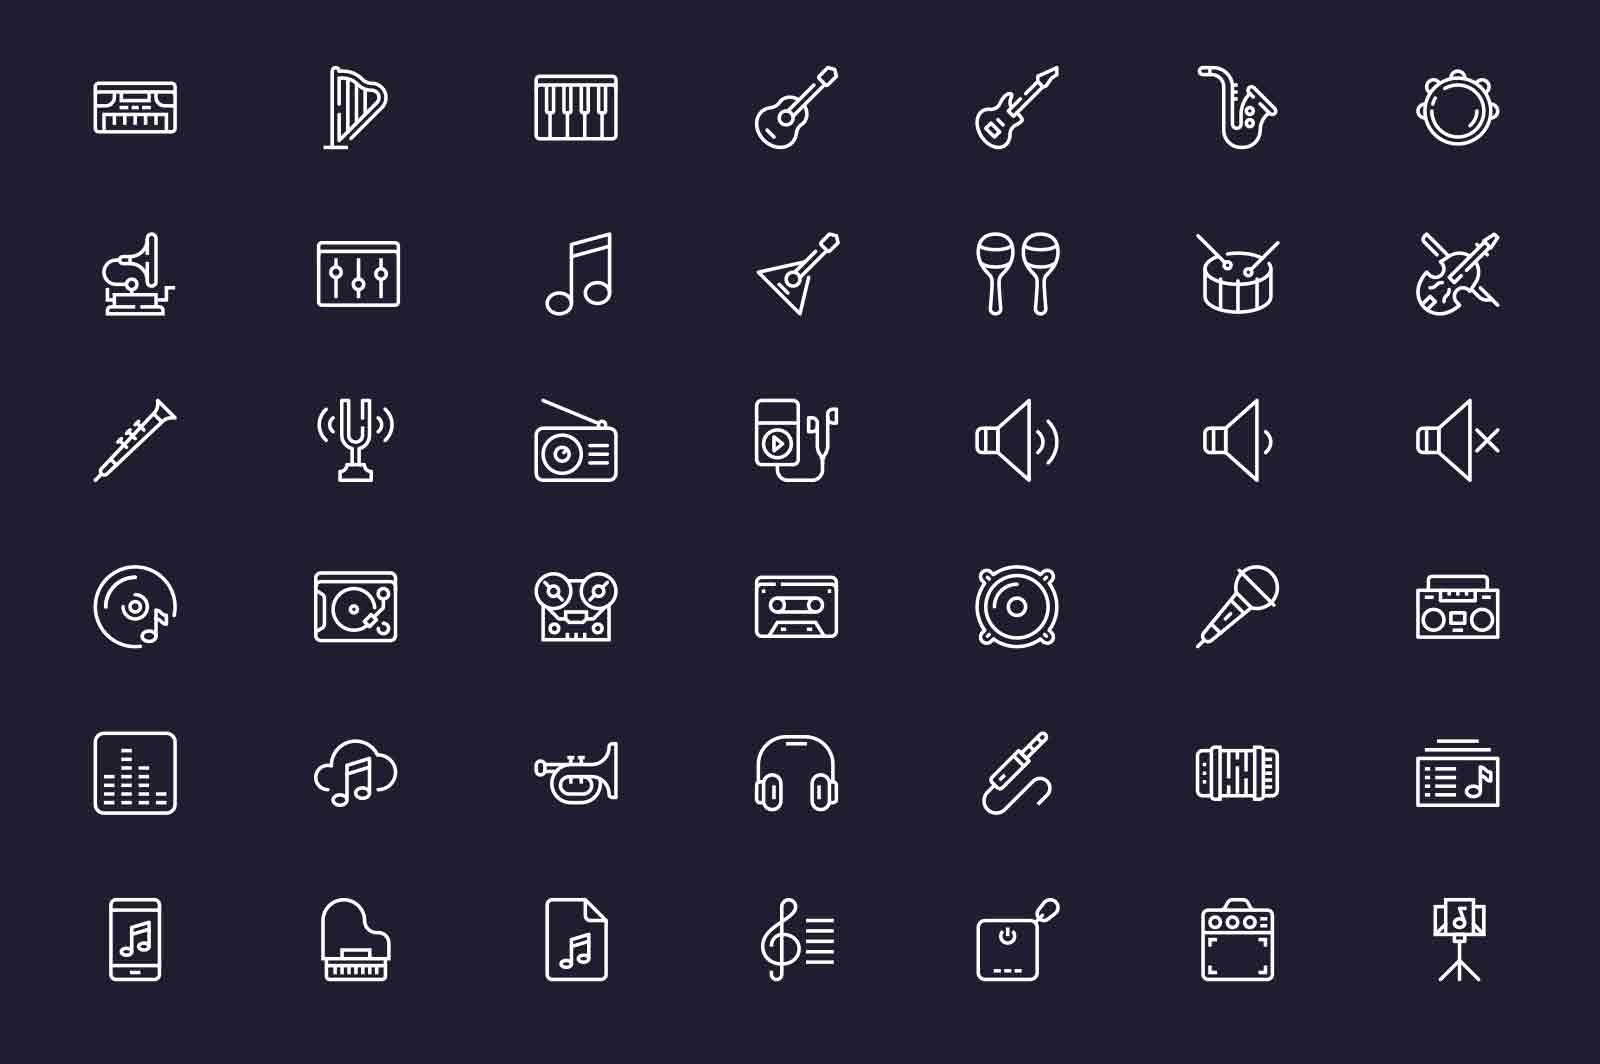 Musical instruments and symbols icons set vector illustration. Guitar, piano, drums, violin, note line icon. Dark background